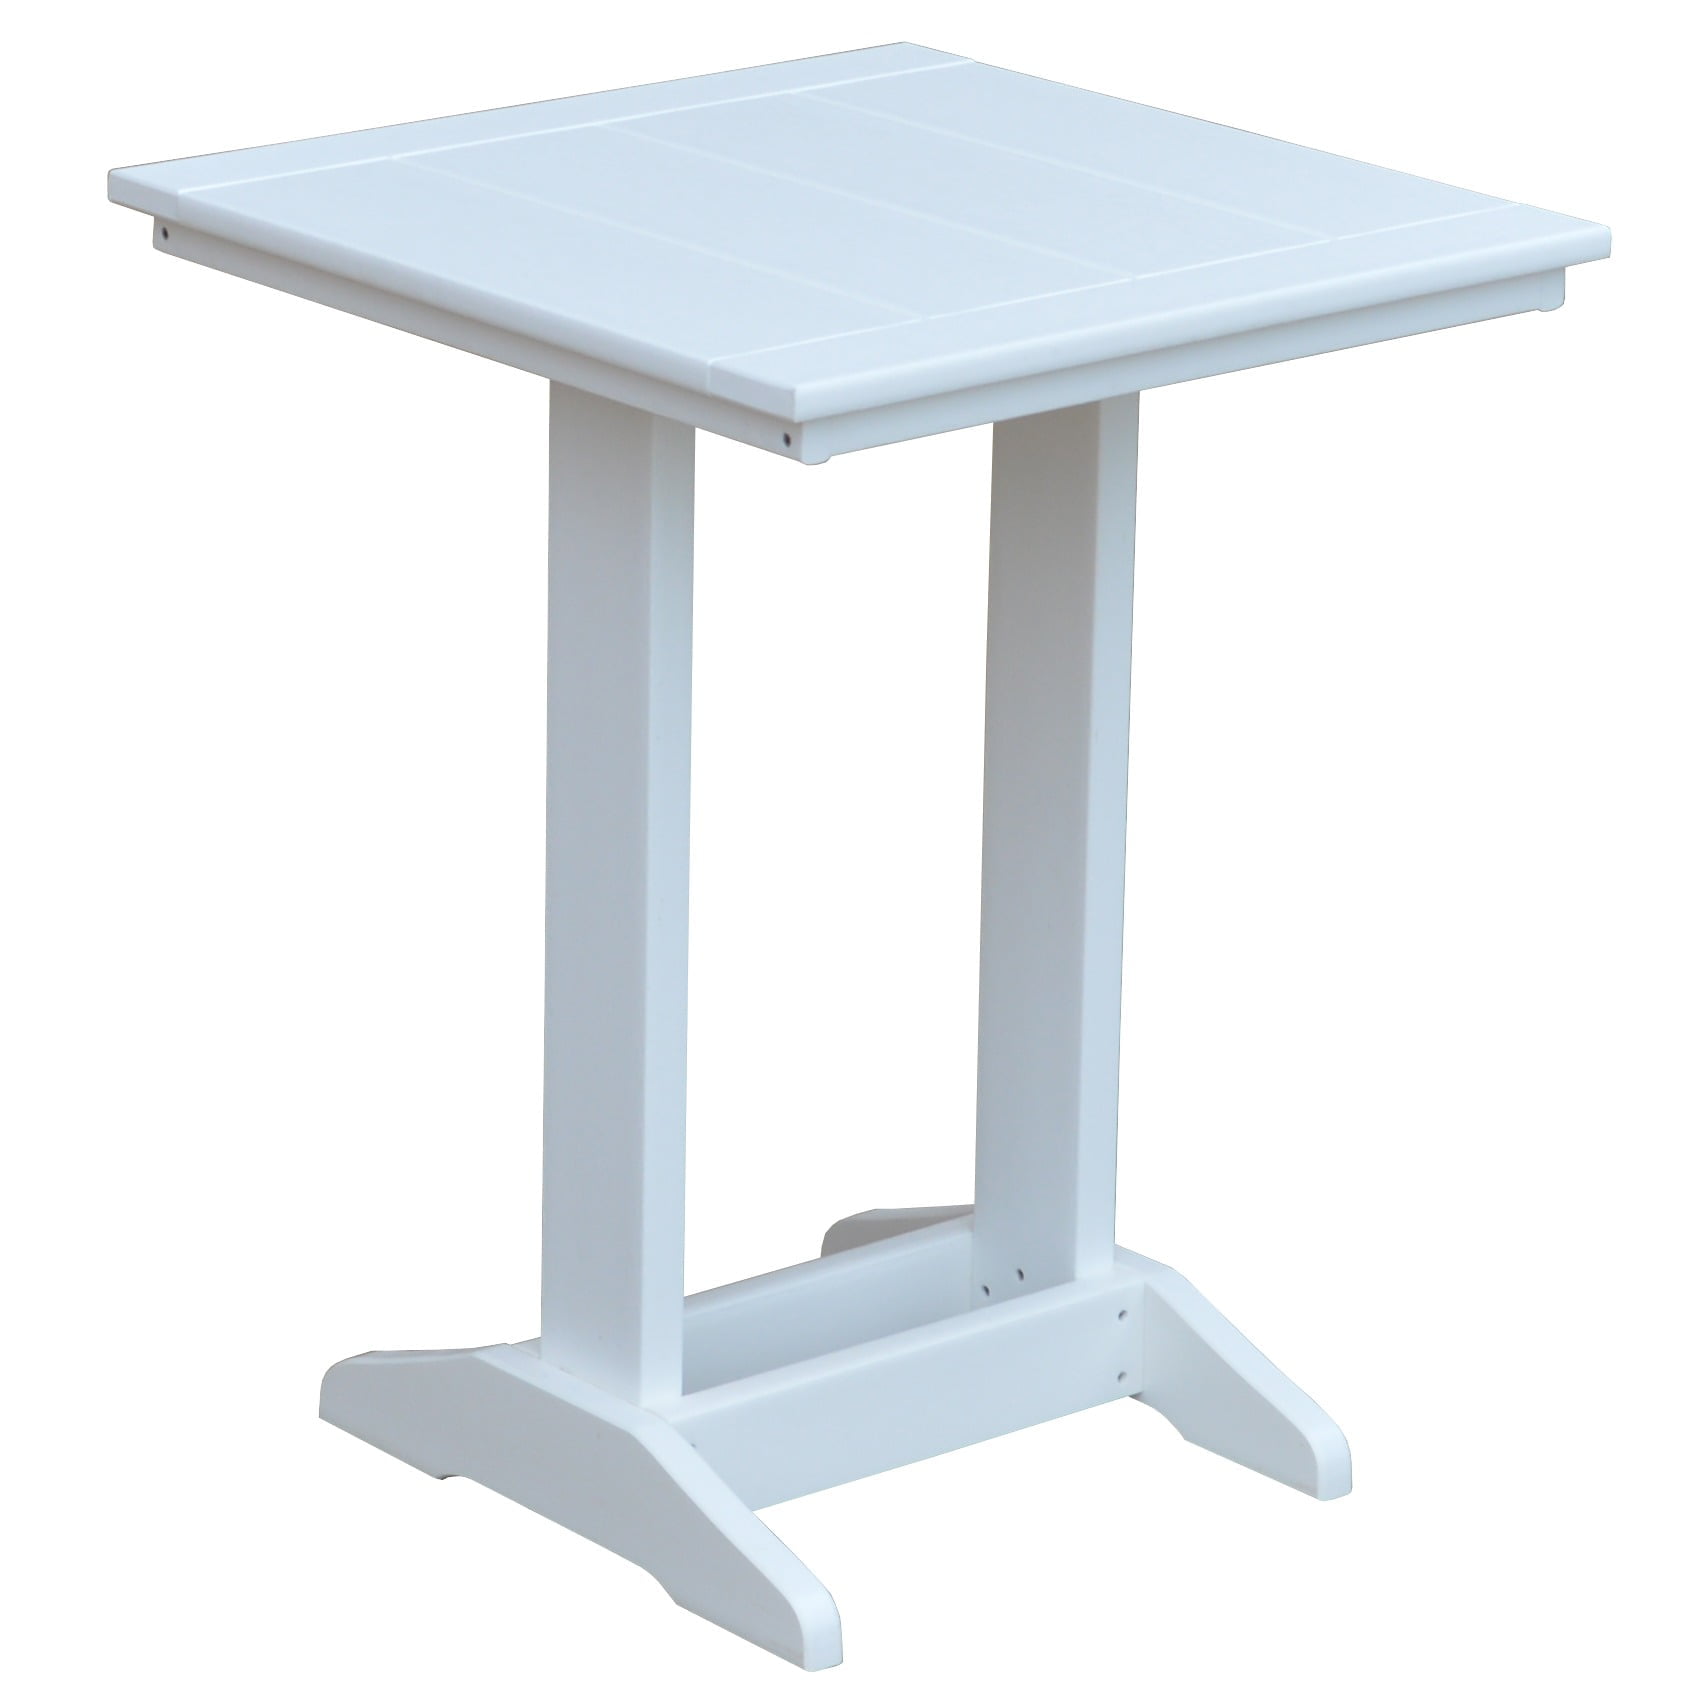 Poly Lumber Square Balcony Side Table